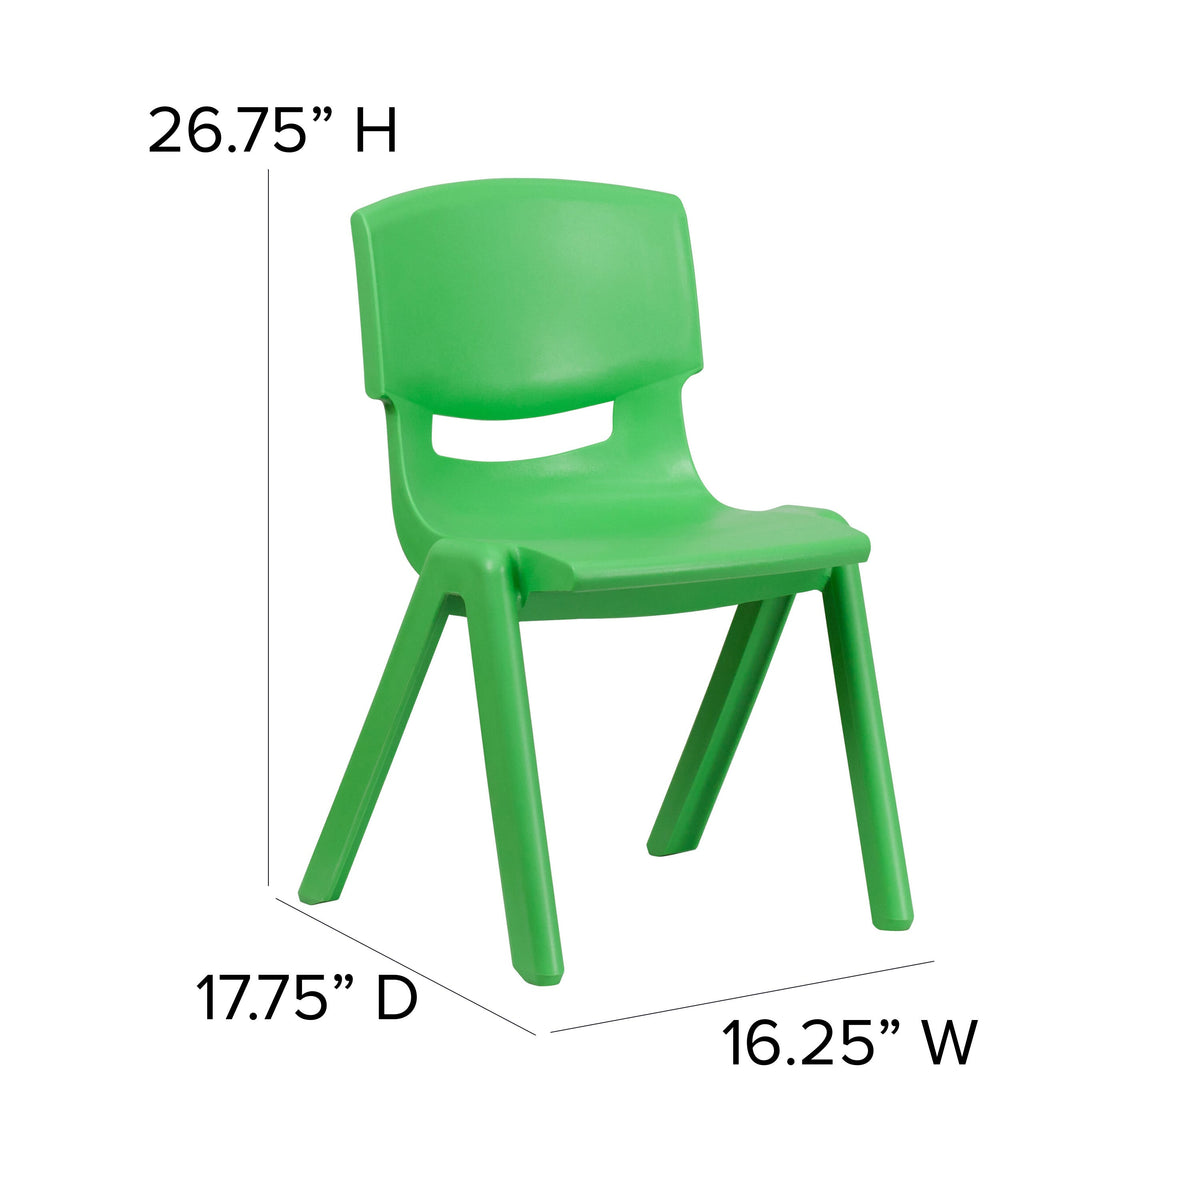 Green |#| 4 Pack Green Plastic Stack School Chair with 15.5inchH Seat, 3rd-7th School Chair